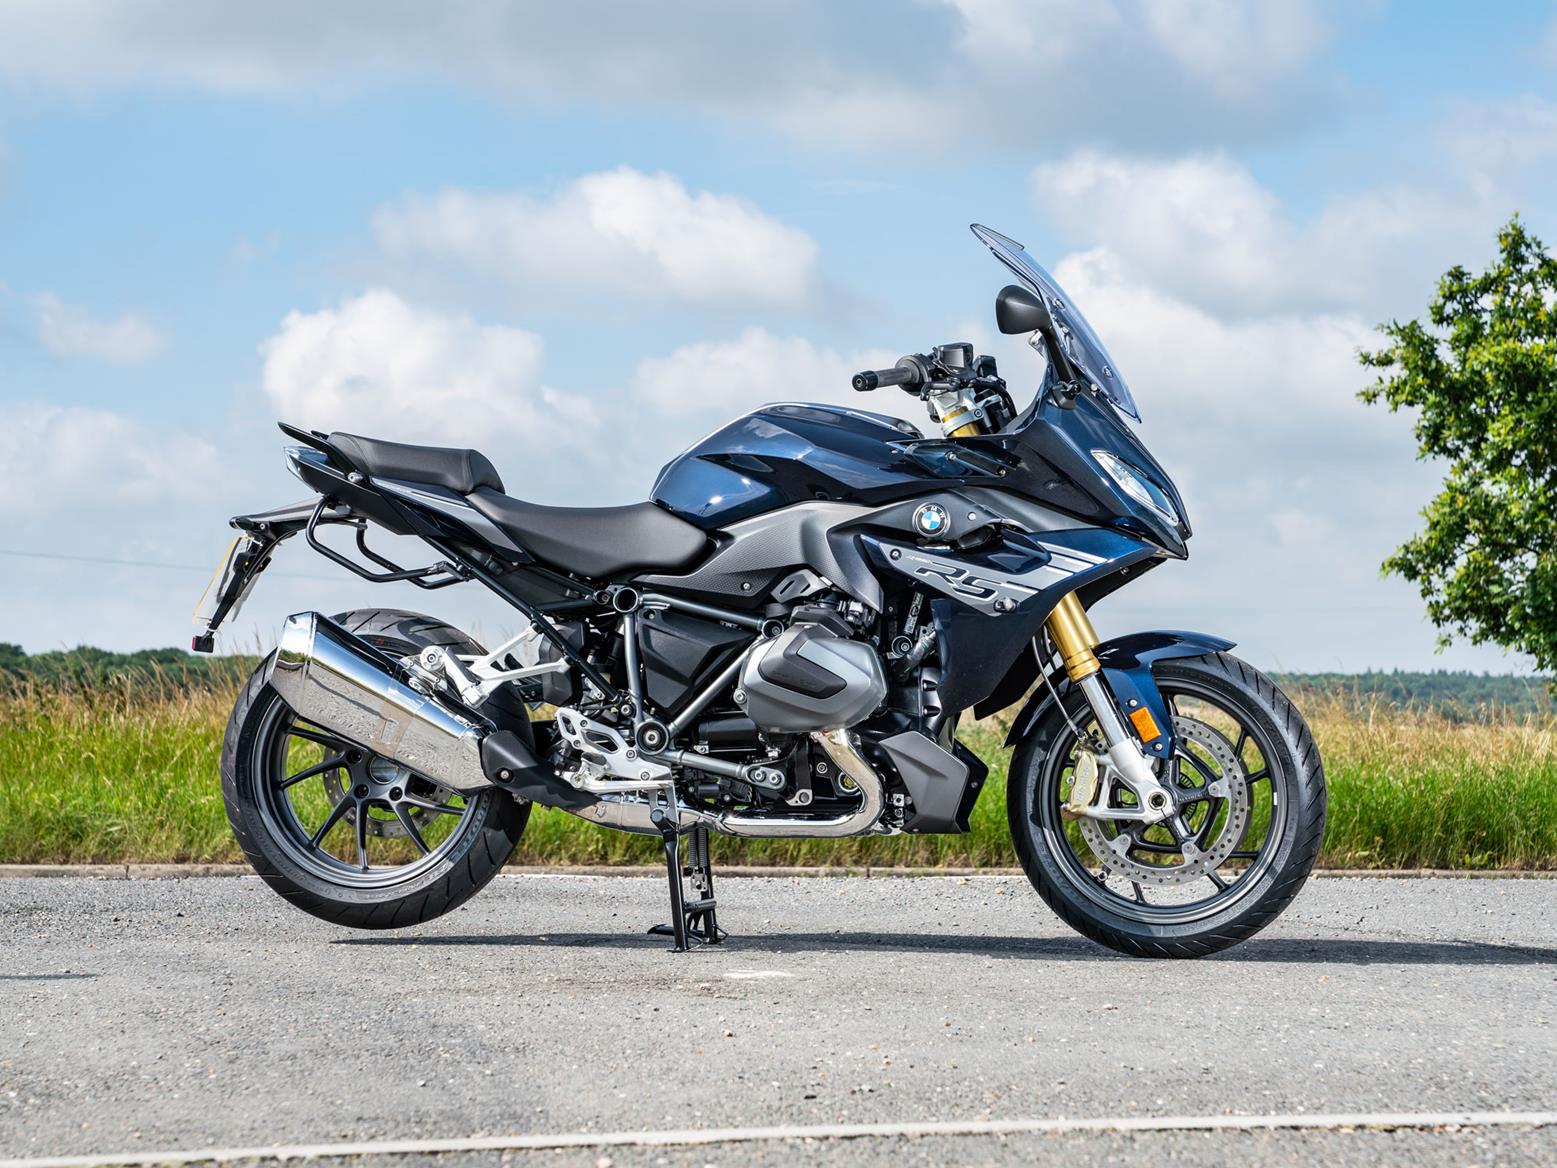 BMW R1250GS (2019-on) Review and used buying guide